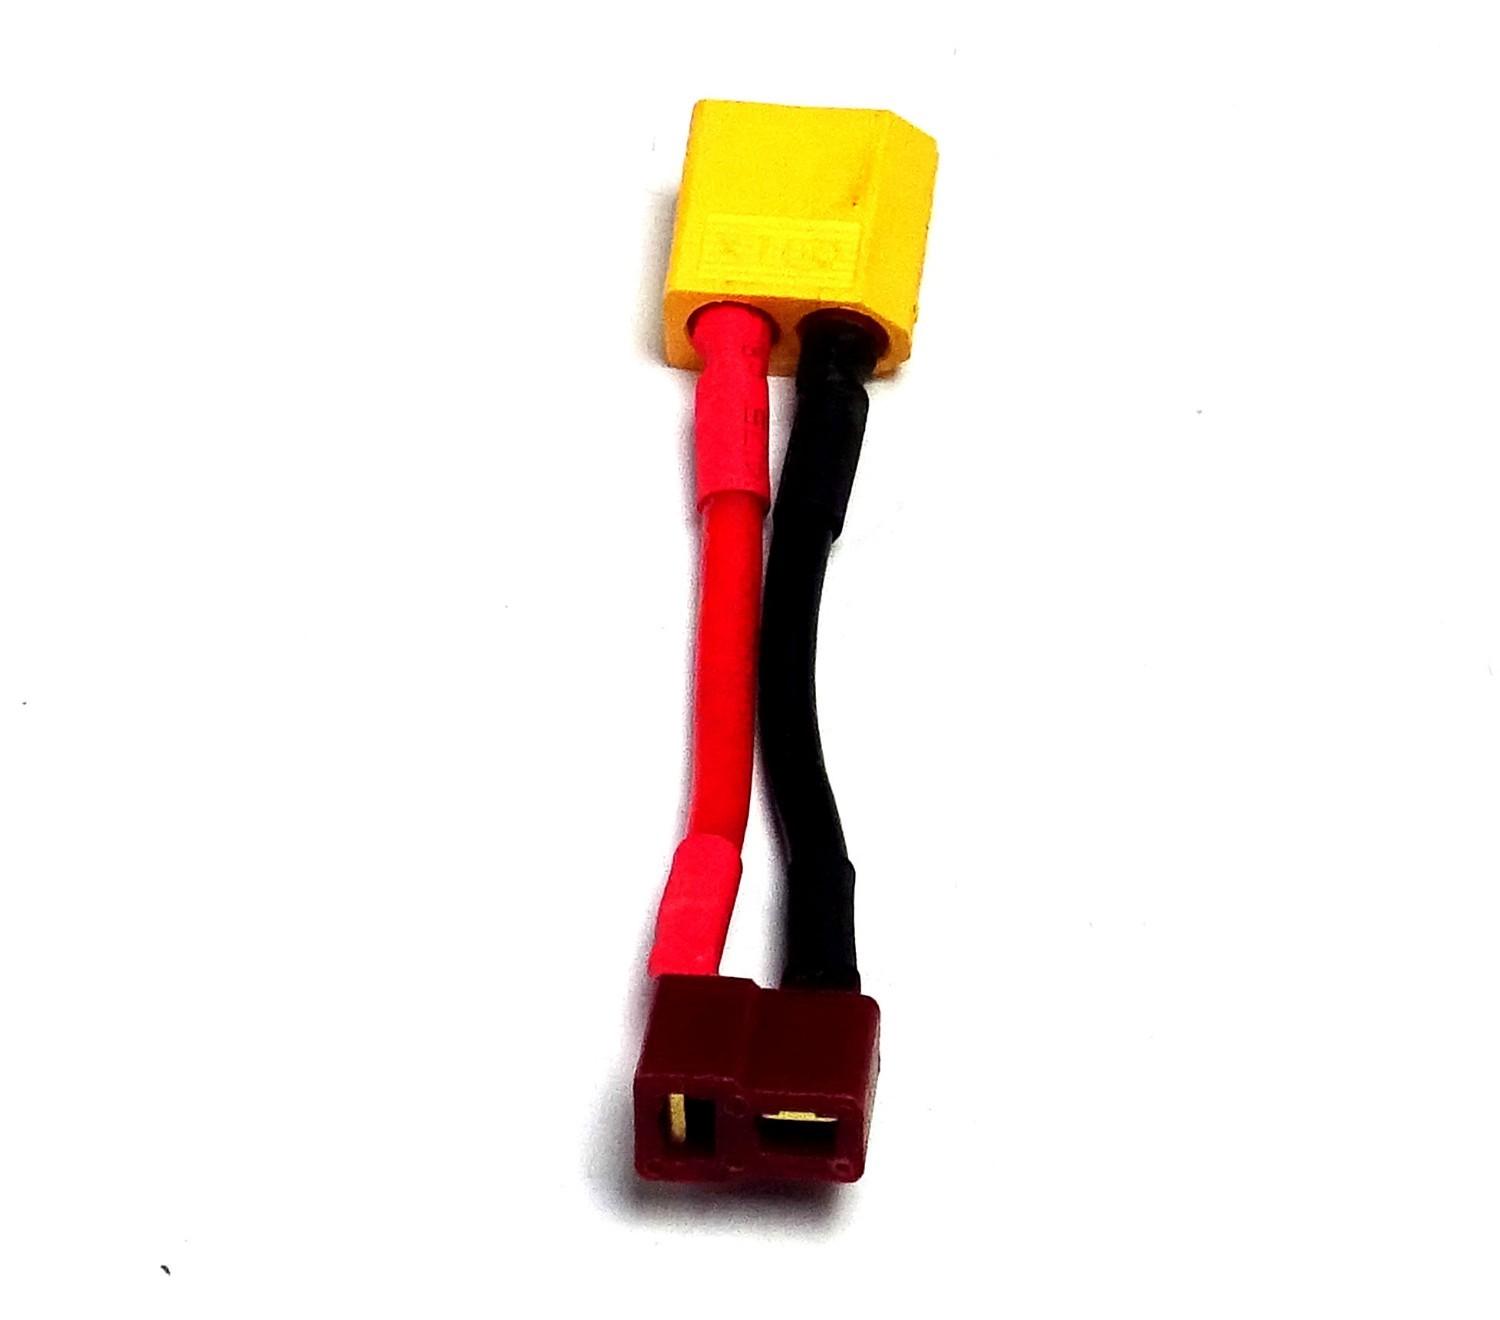  XT60 Male Connector to T-plug Female Connector Adaptor with Cable Wire